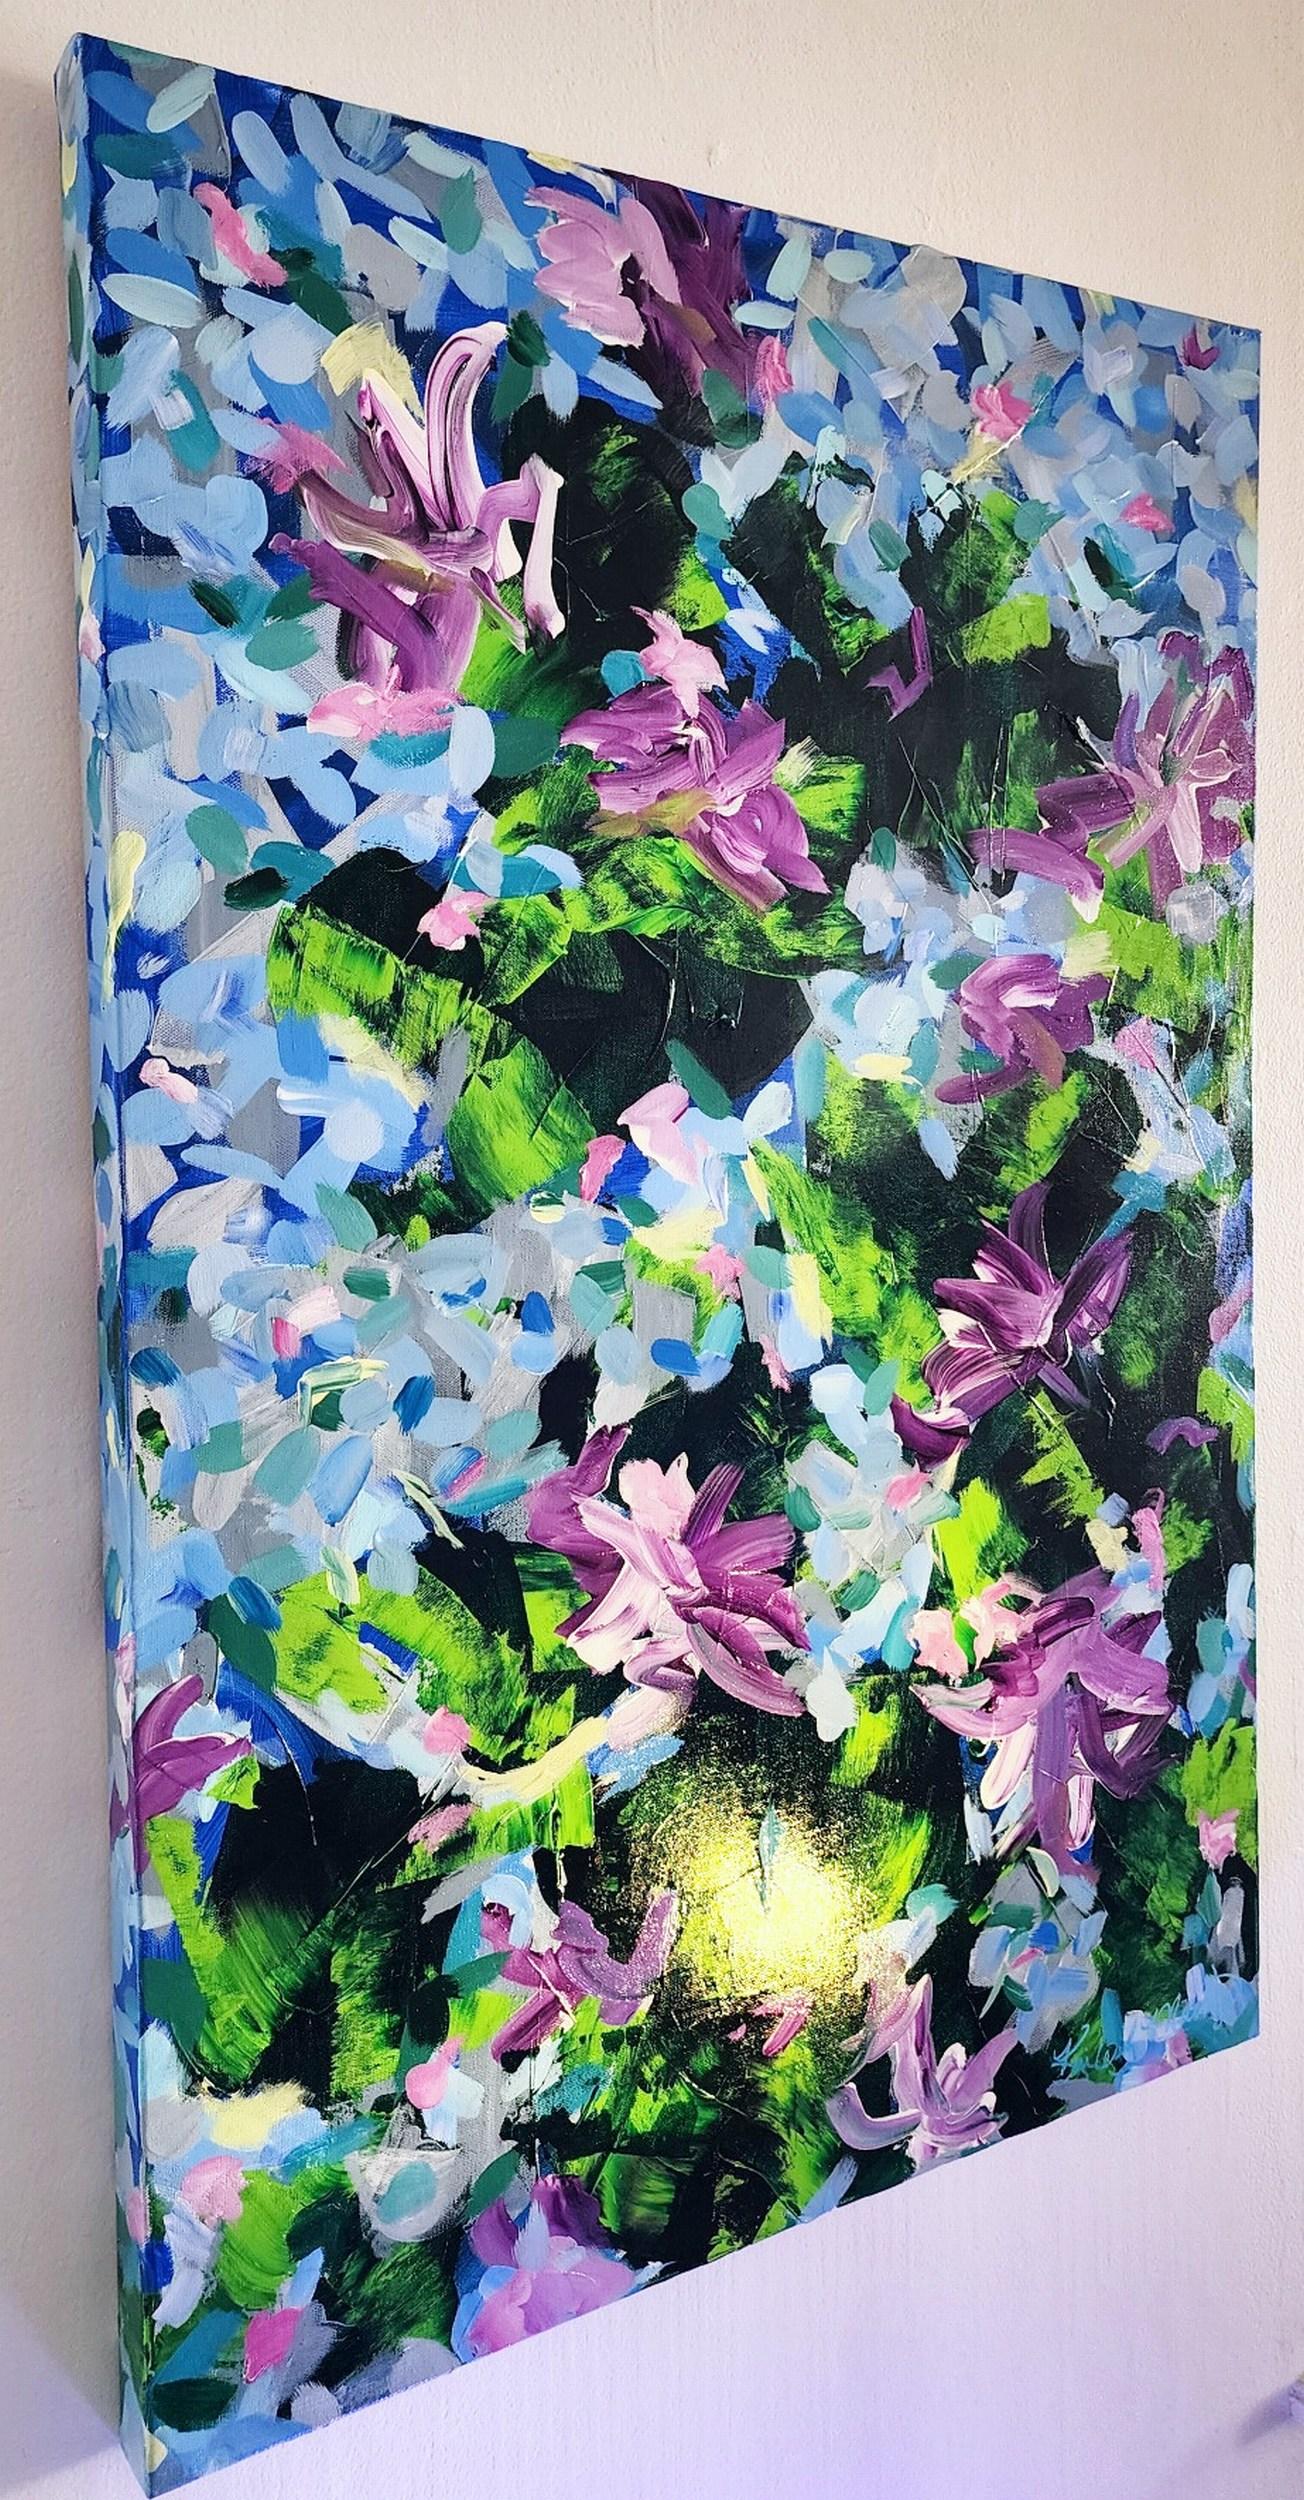 Joy (Abstract, Floral, Blue, Pink, Rose, Purple, Landscape, Garden) - Contemporary Painting by Kimberly Marney